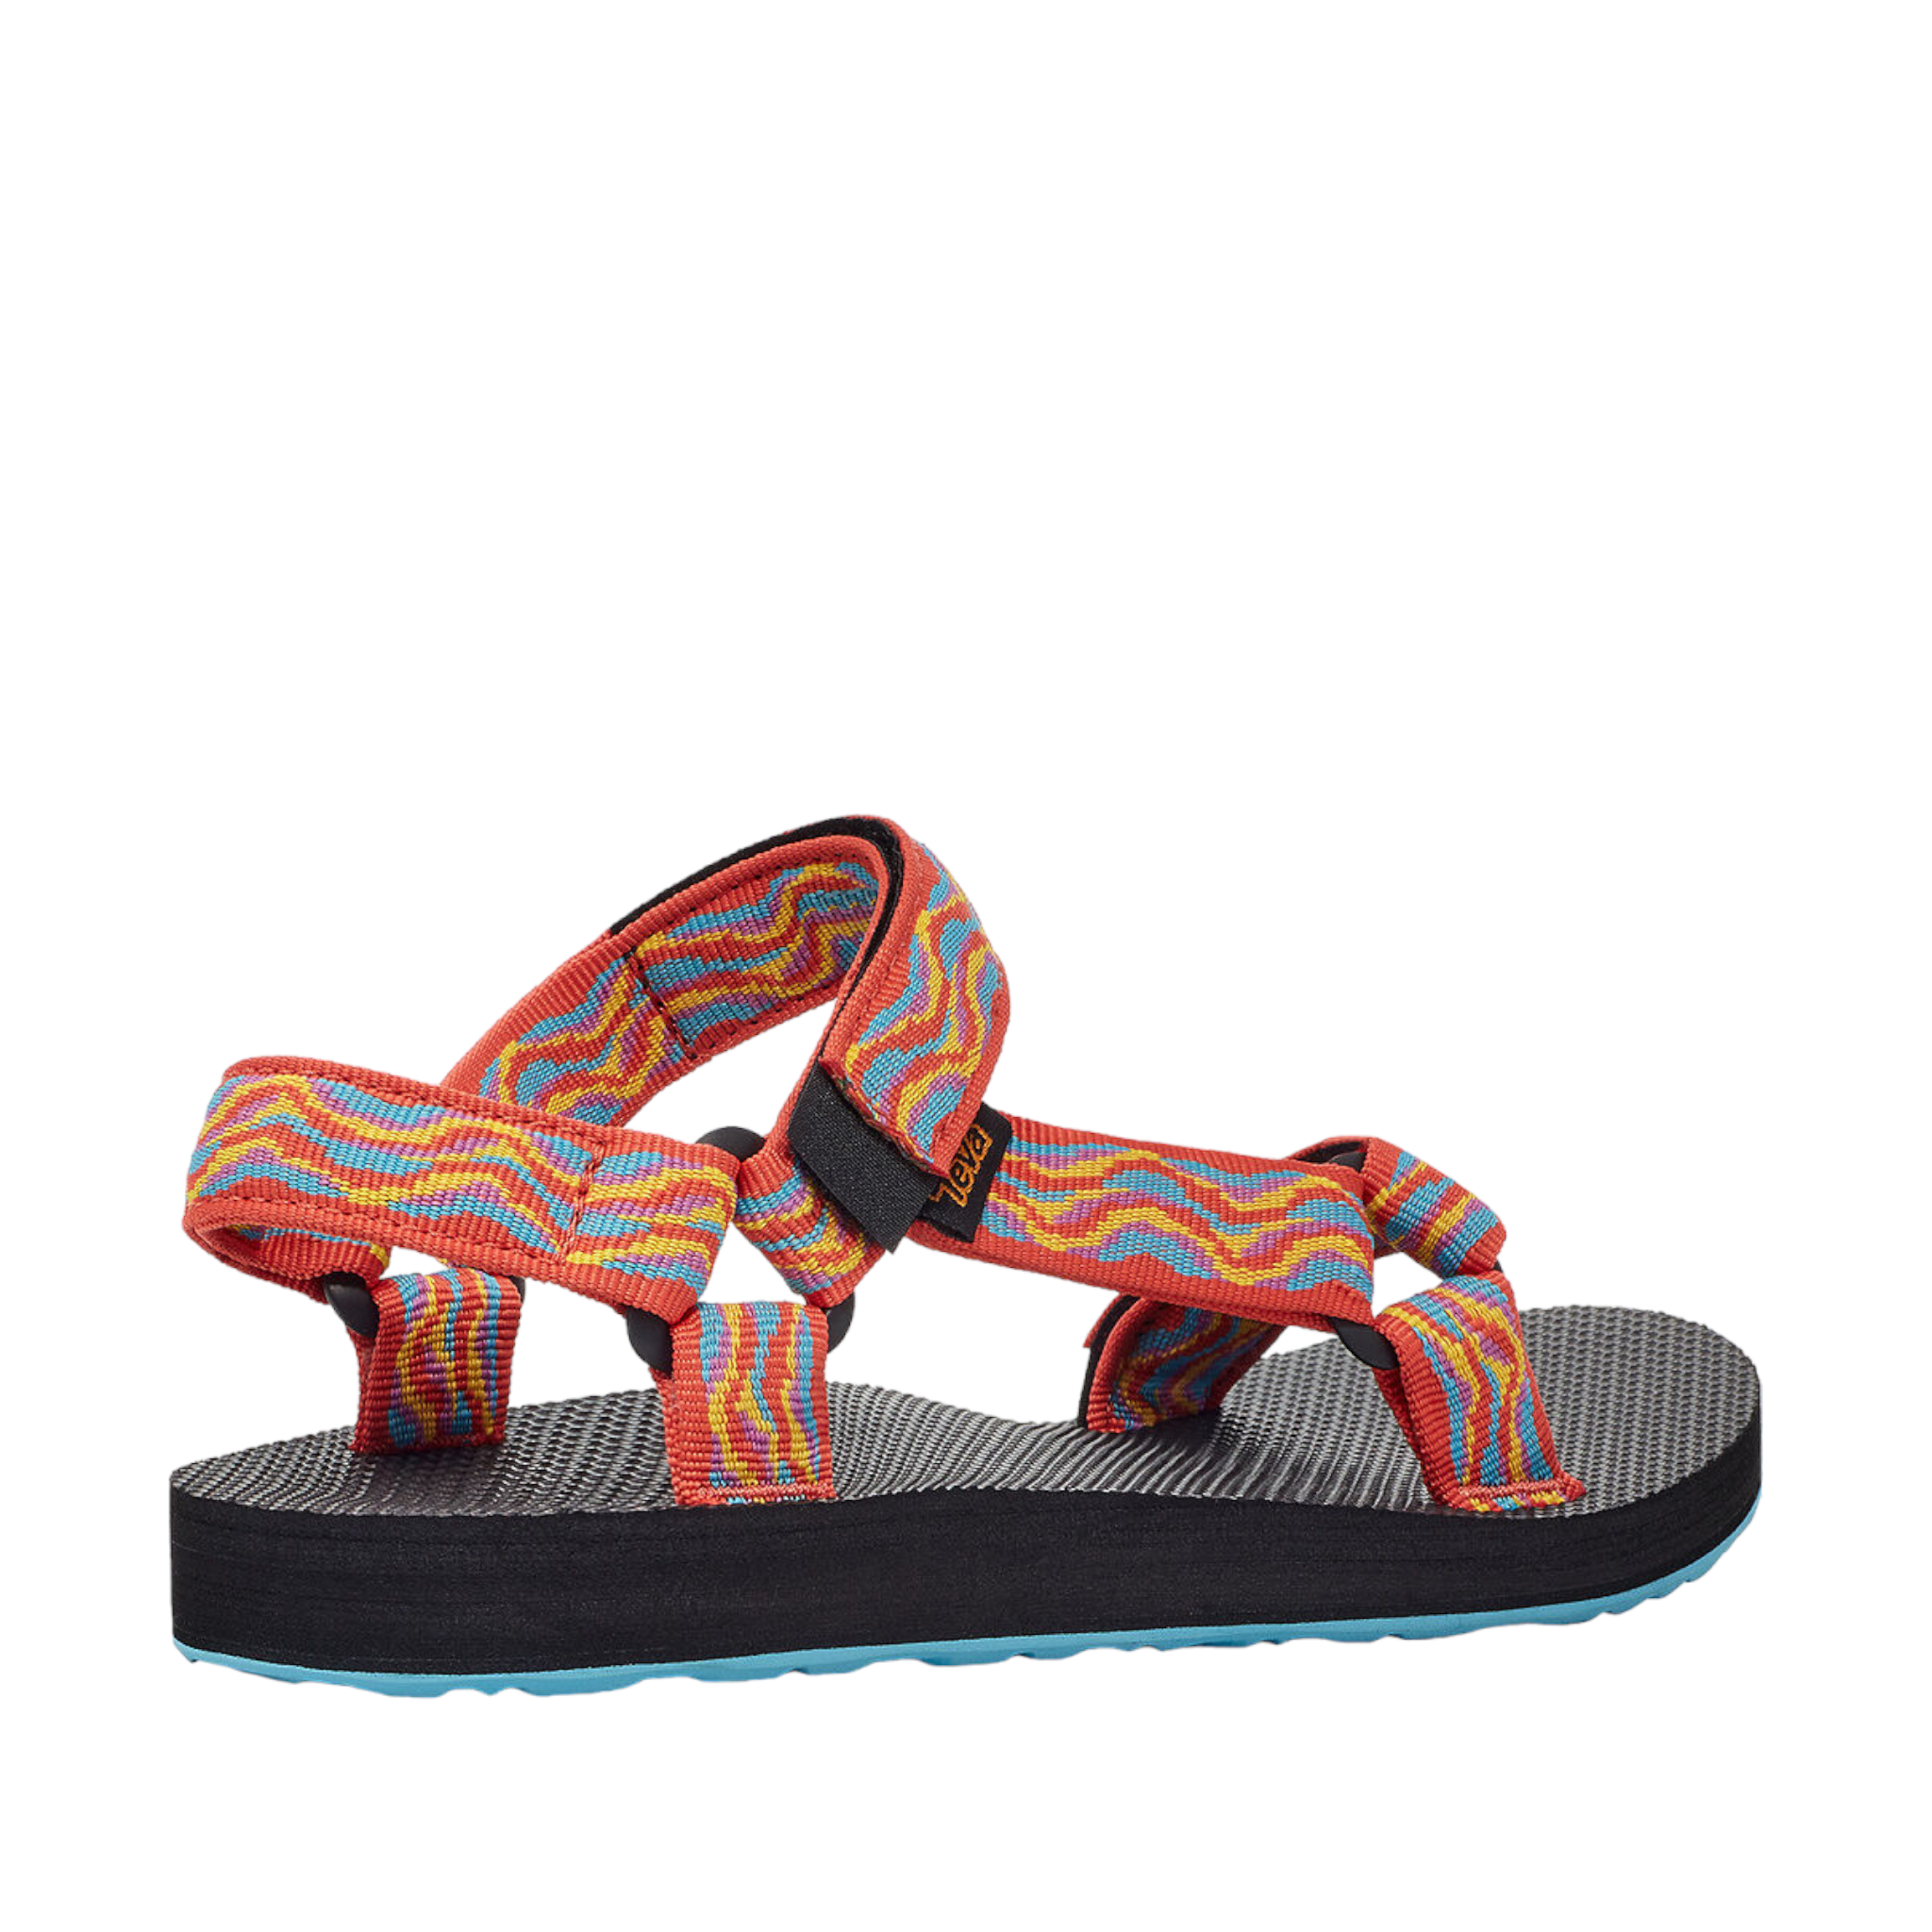 Shop W Original Universal Revive - with shoe&me - from Teva - Sandals - Sandals, Summer, Winter, Womens